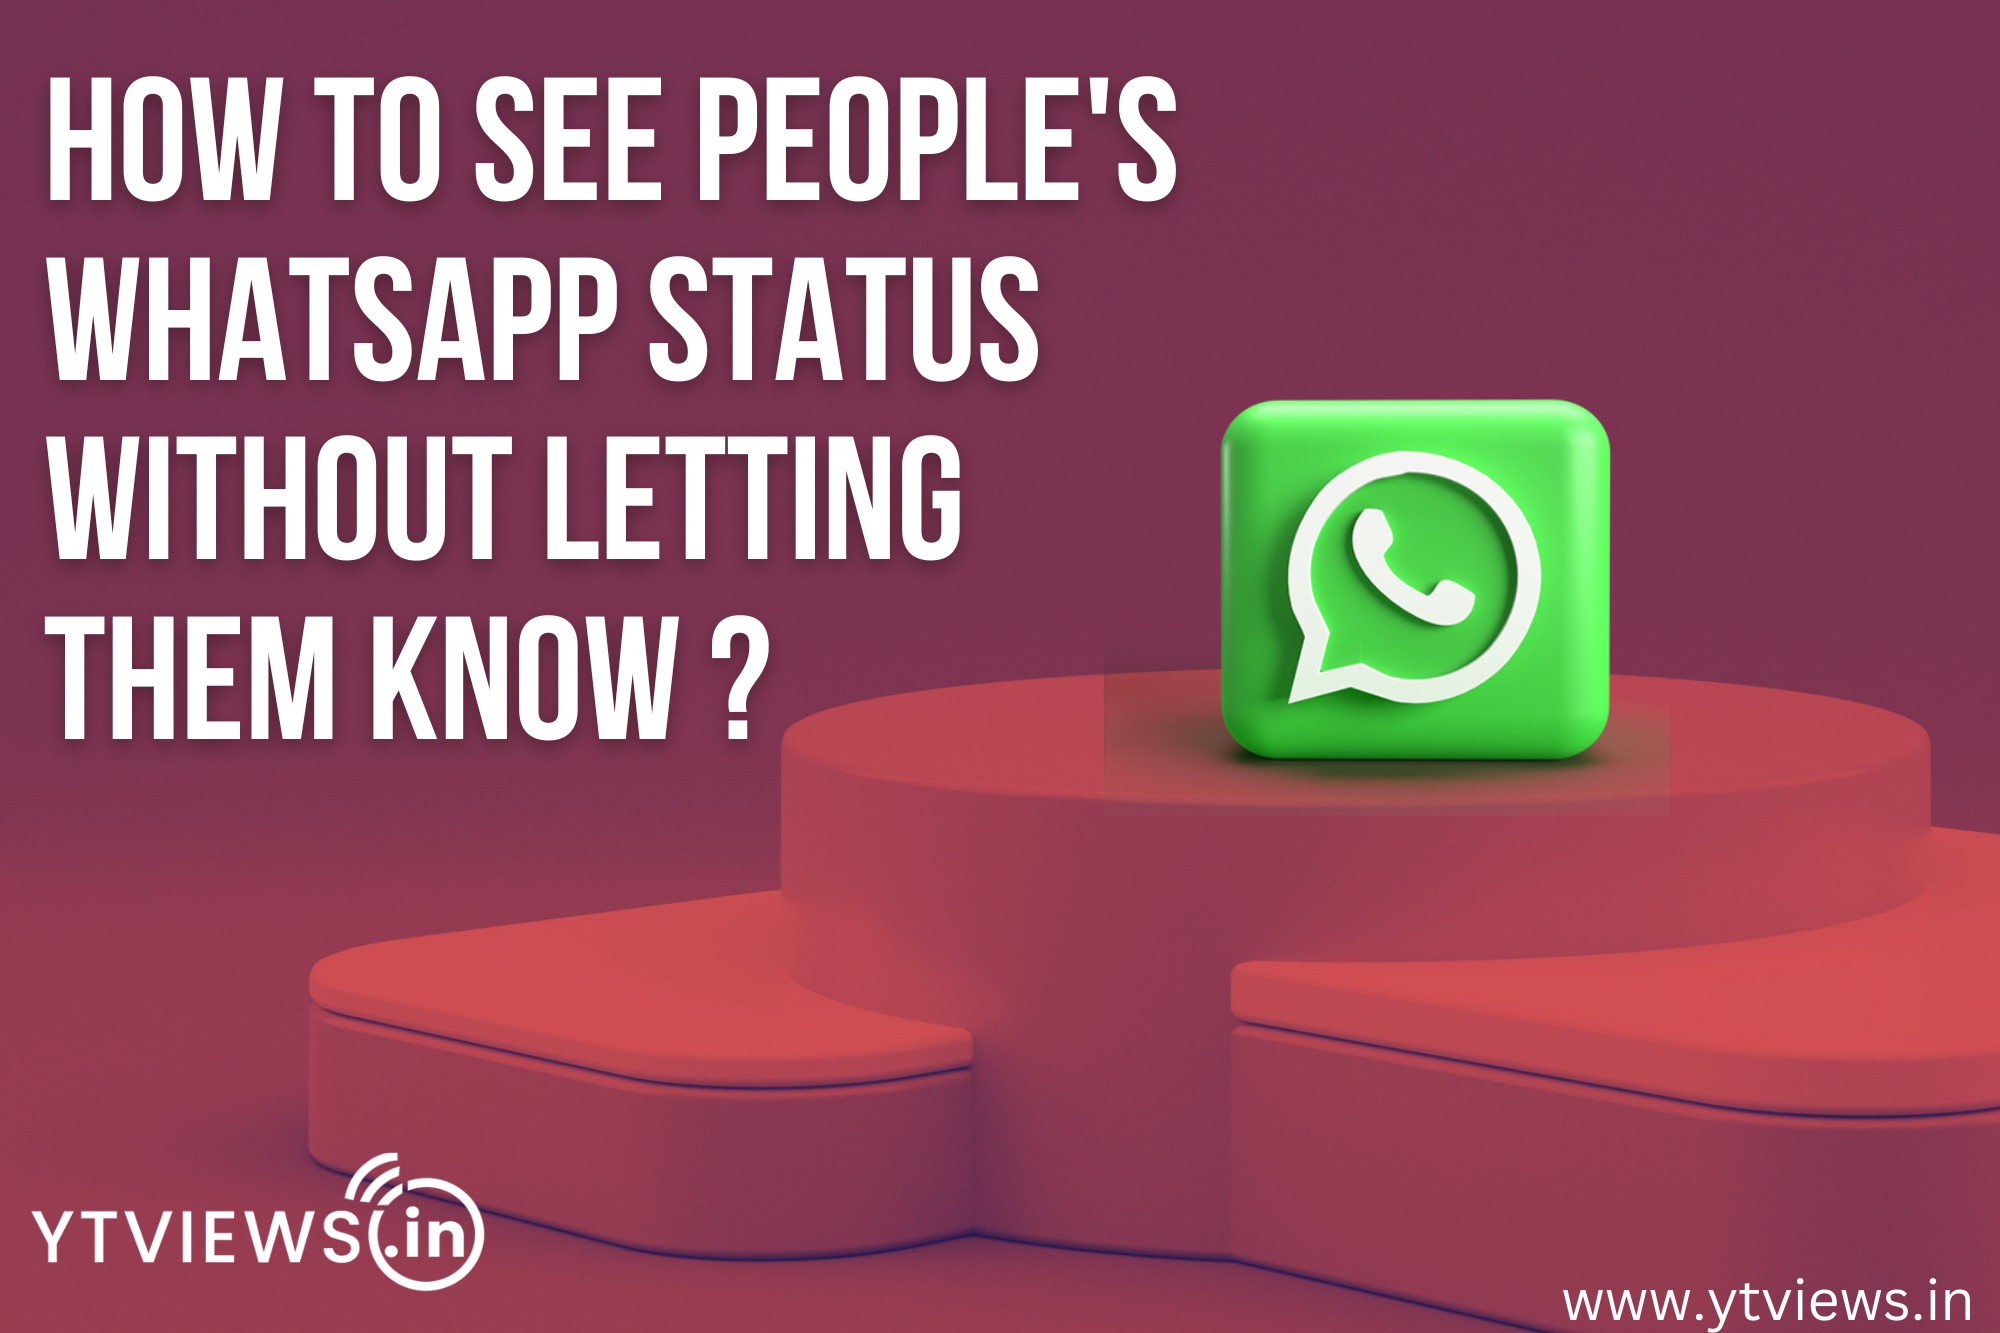 How To See People’s WhatsaApp Status Without Letting Them Know?